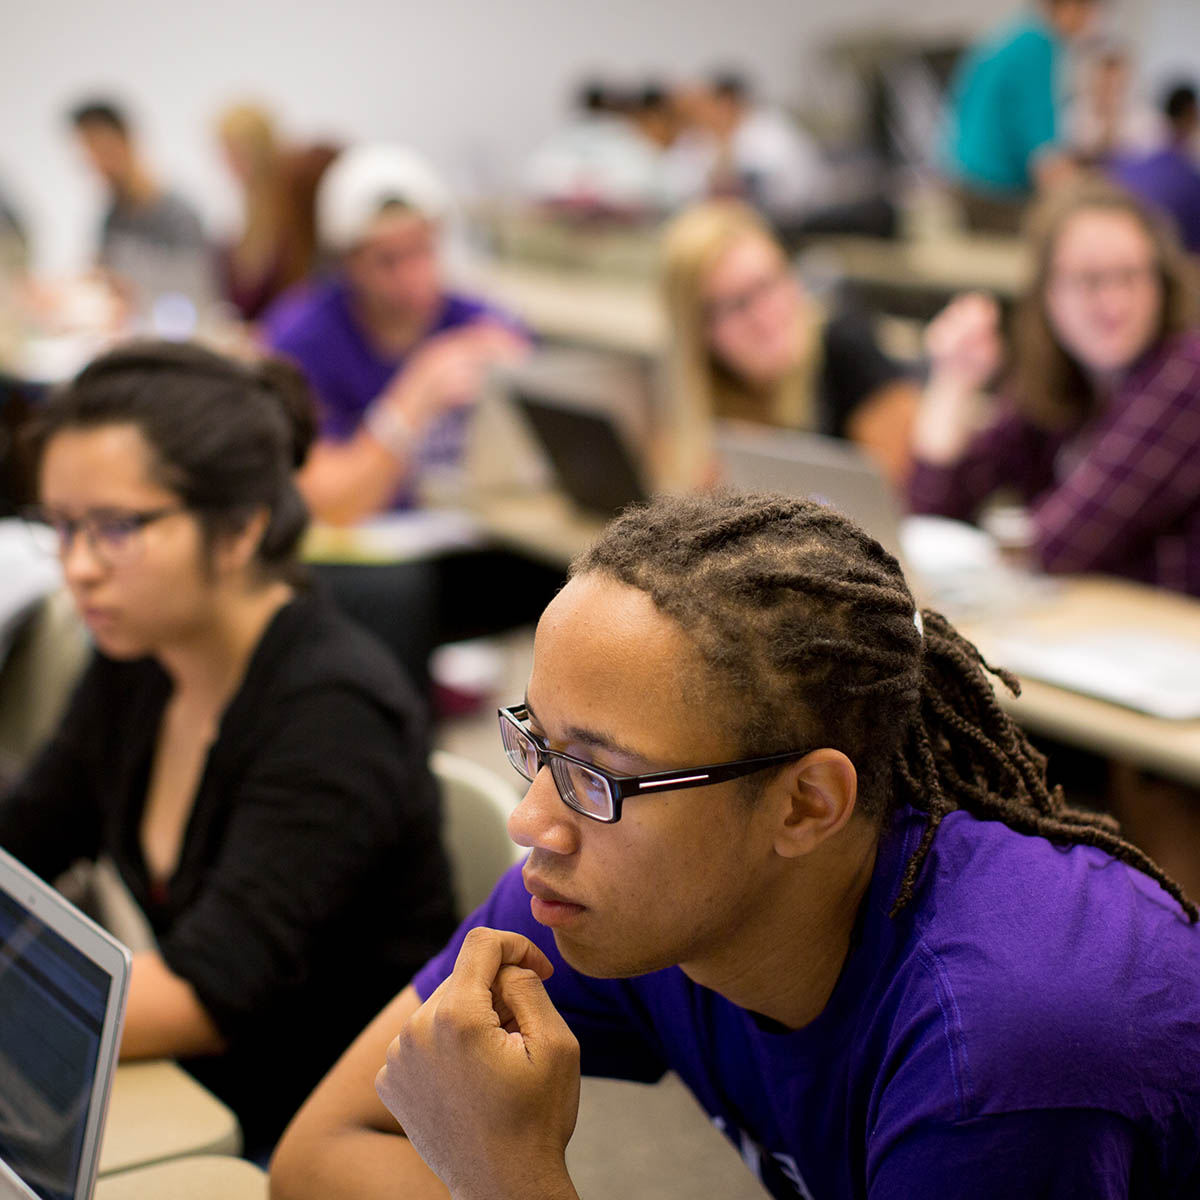 Photo of students listening in a classroom, with a young Black man with dreads, glasses, and a purple Chatham shirt in the foreground